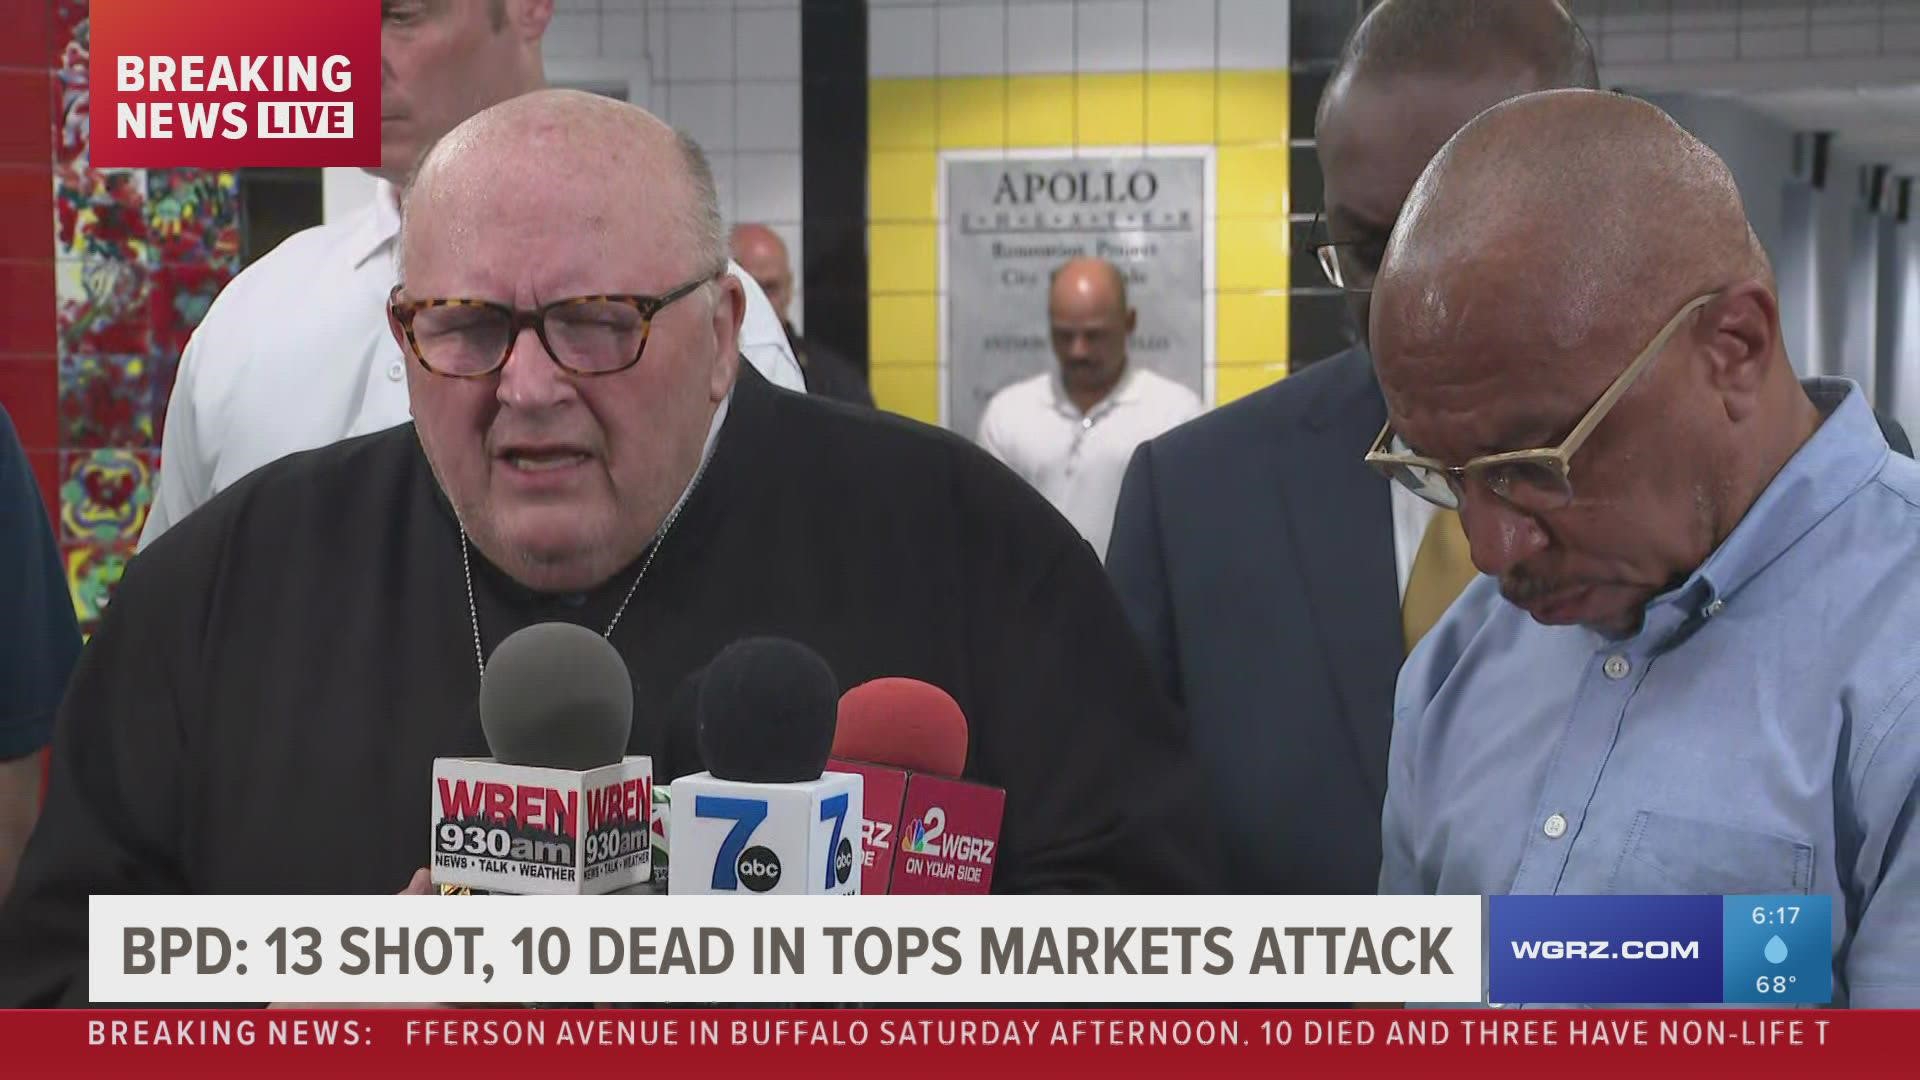 Leaders pray after a press conference about a mass shooting that killed 10 people at a supermarket in Buffalo, NY.